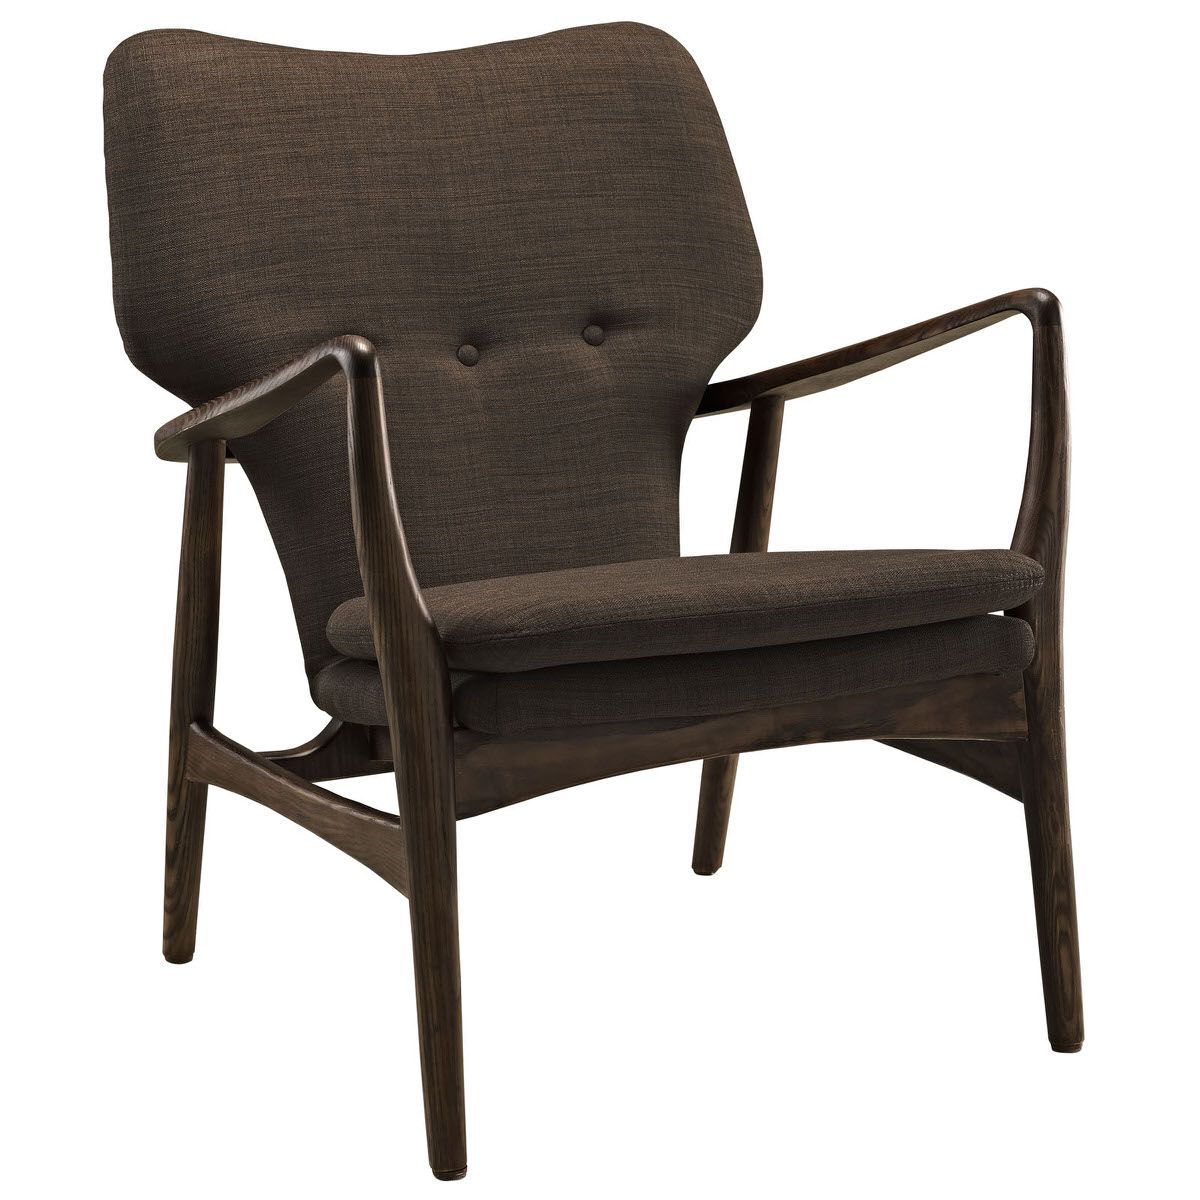 Heed Upholstered Lounge Chair Walnut Brownmodway Pertaining To Revolve Swivel Accent Chairs (View 7 of 20)